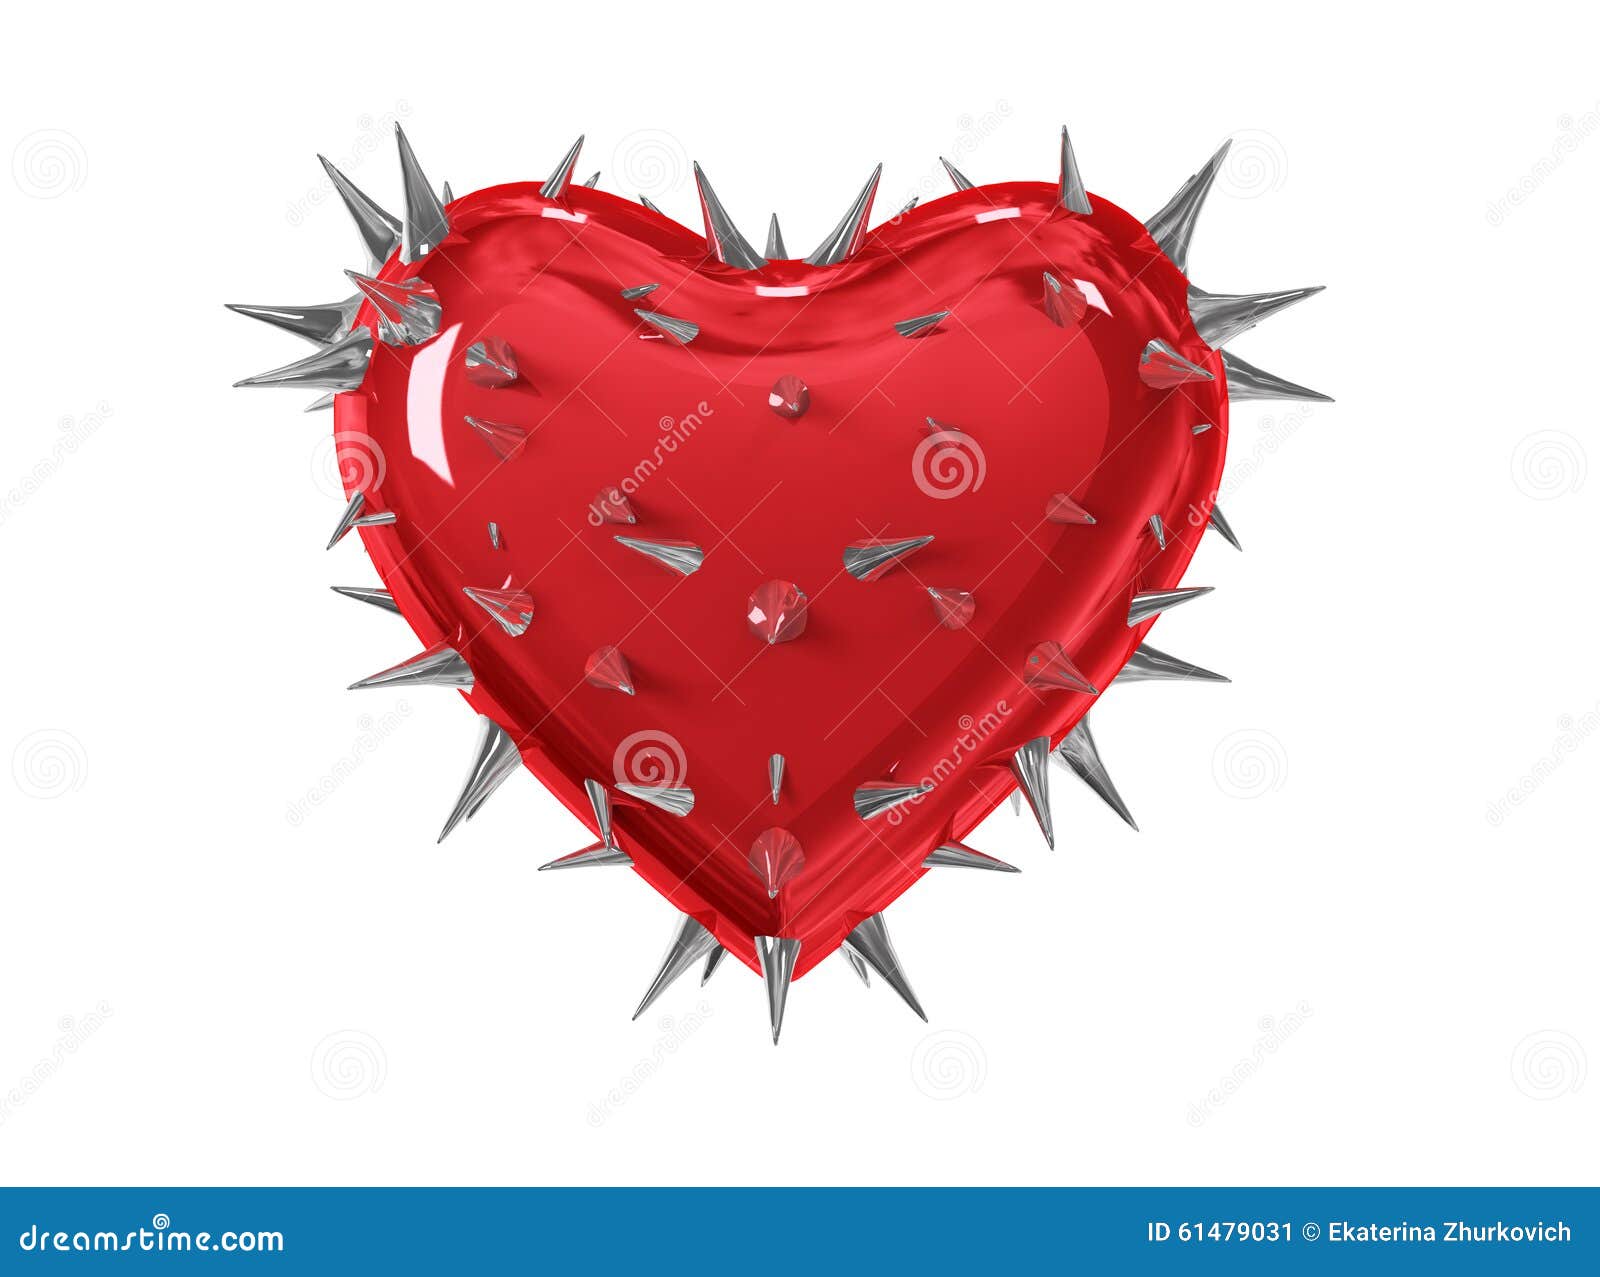 heart wrapped in thorns